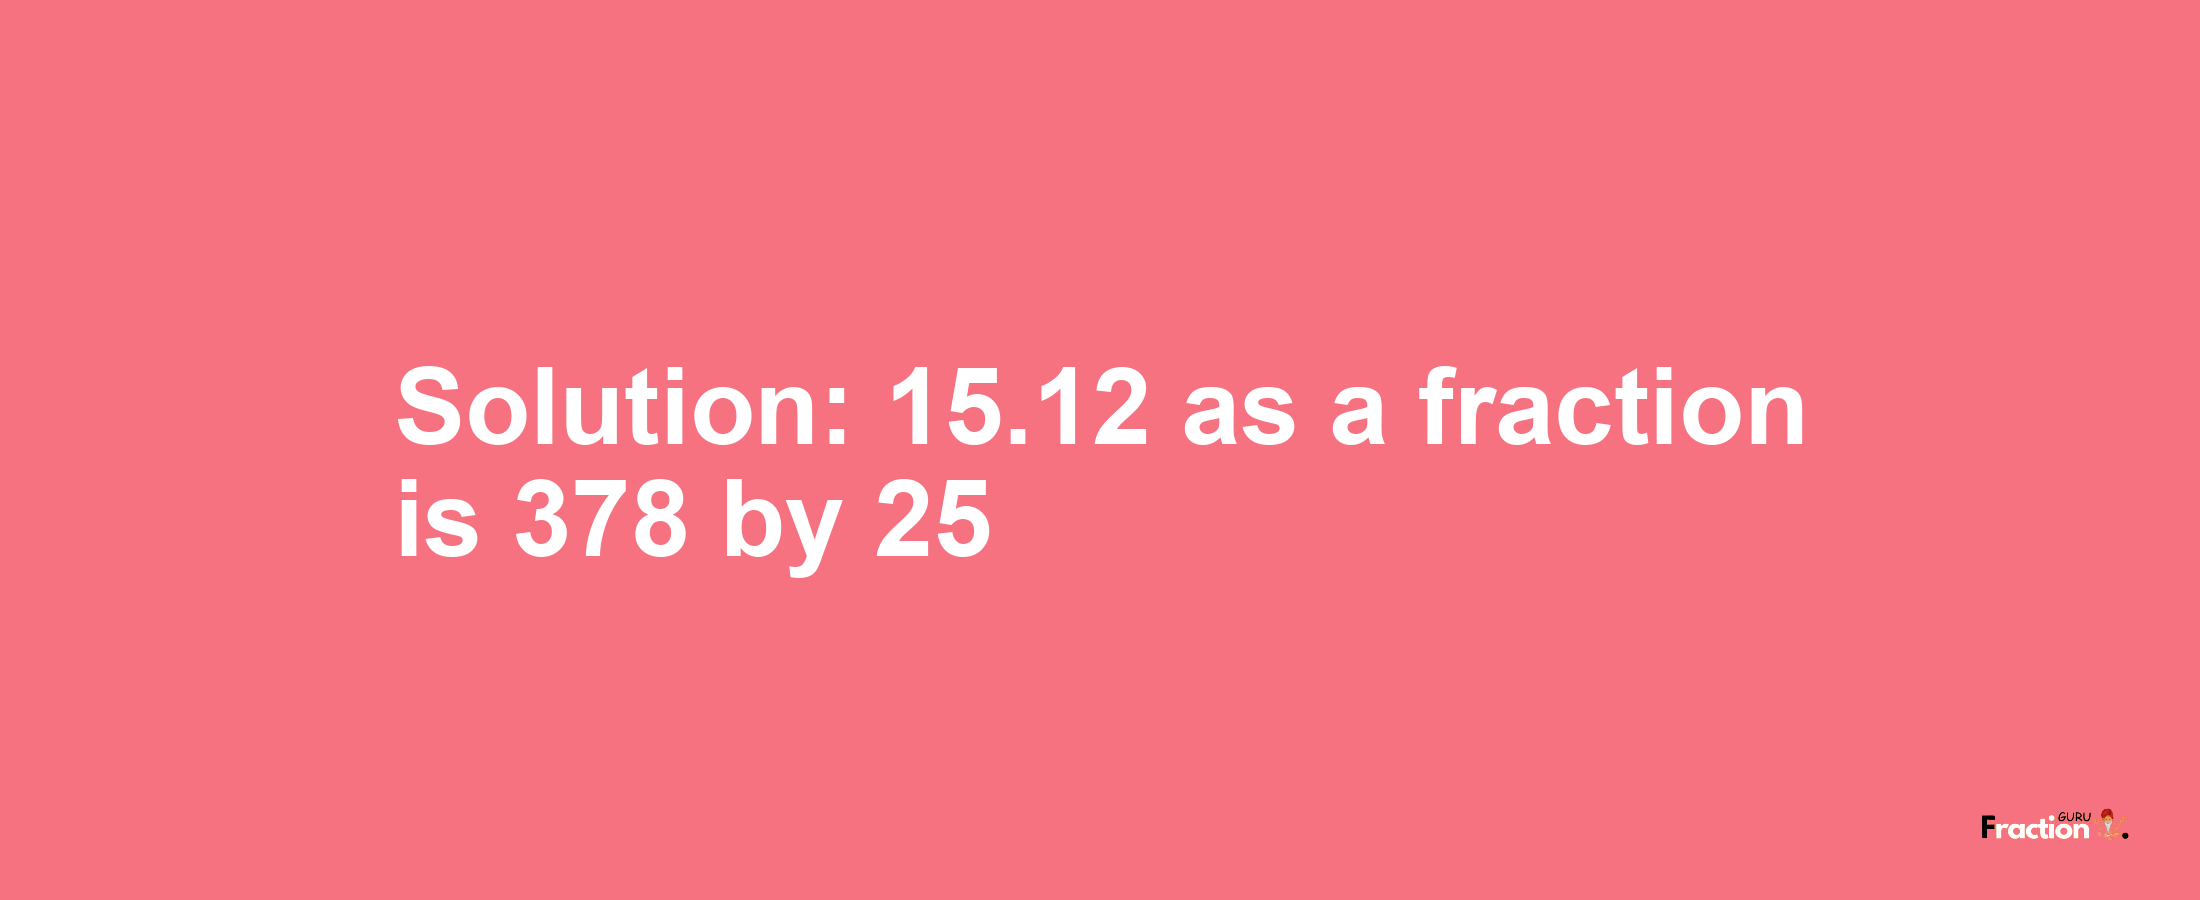 Solution:15.12 as a fraction is 378/25